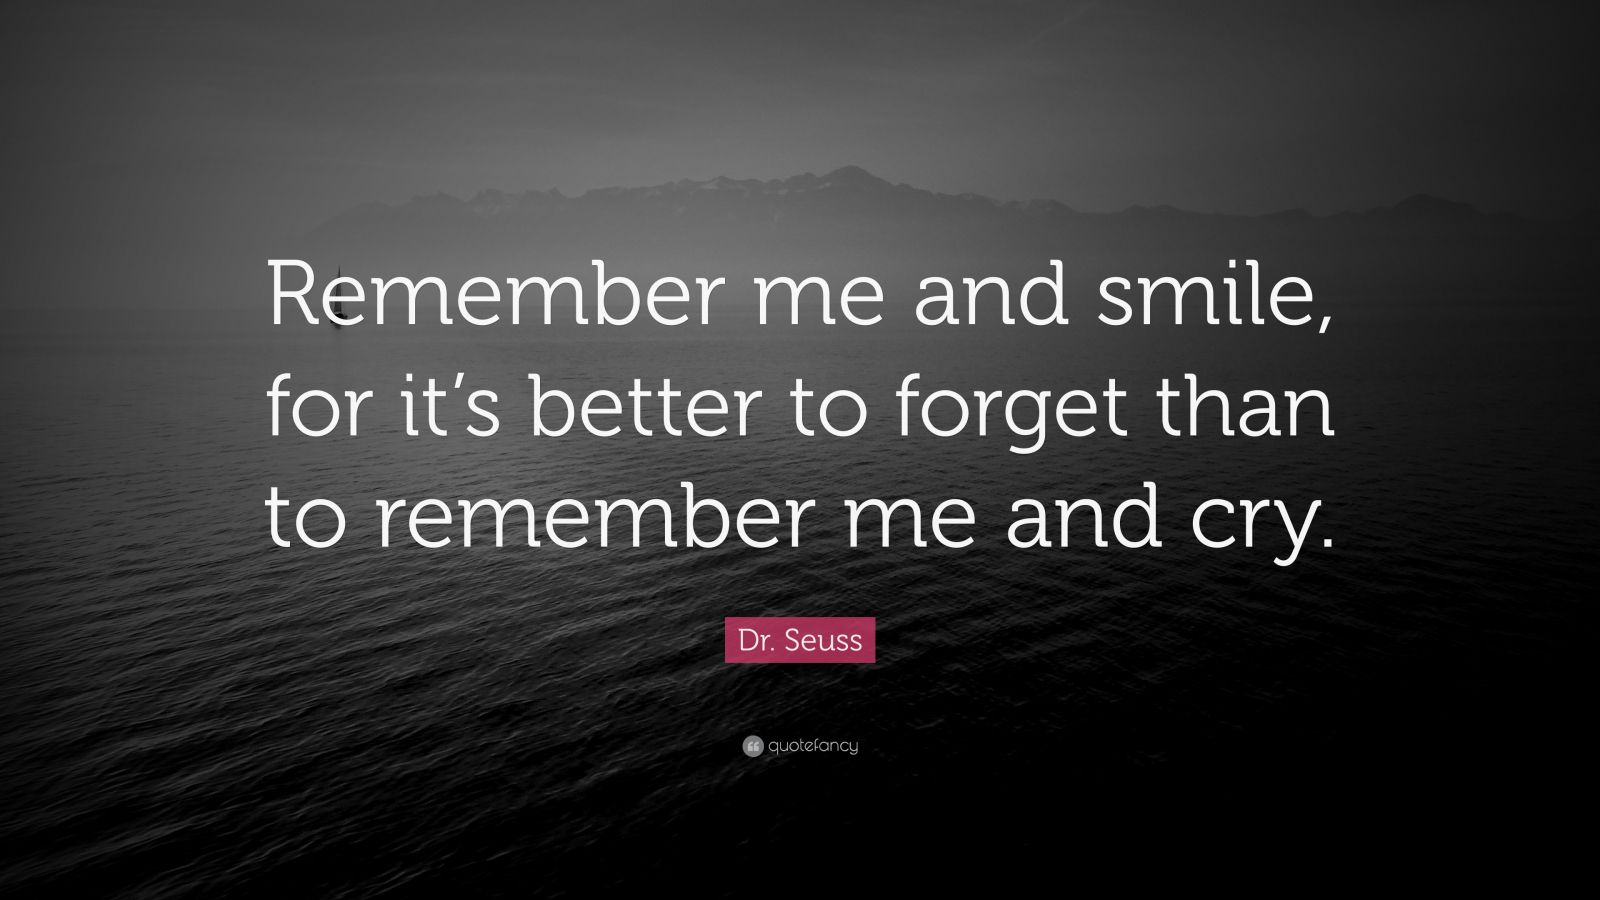 Dr. Seuss Quote: “Remember me and smile, for it’s better to forget than